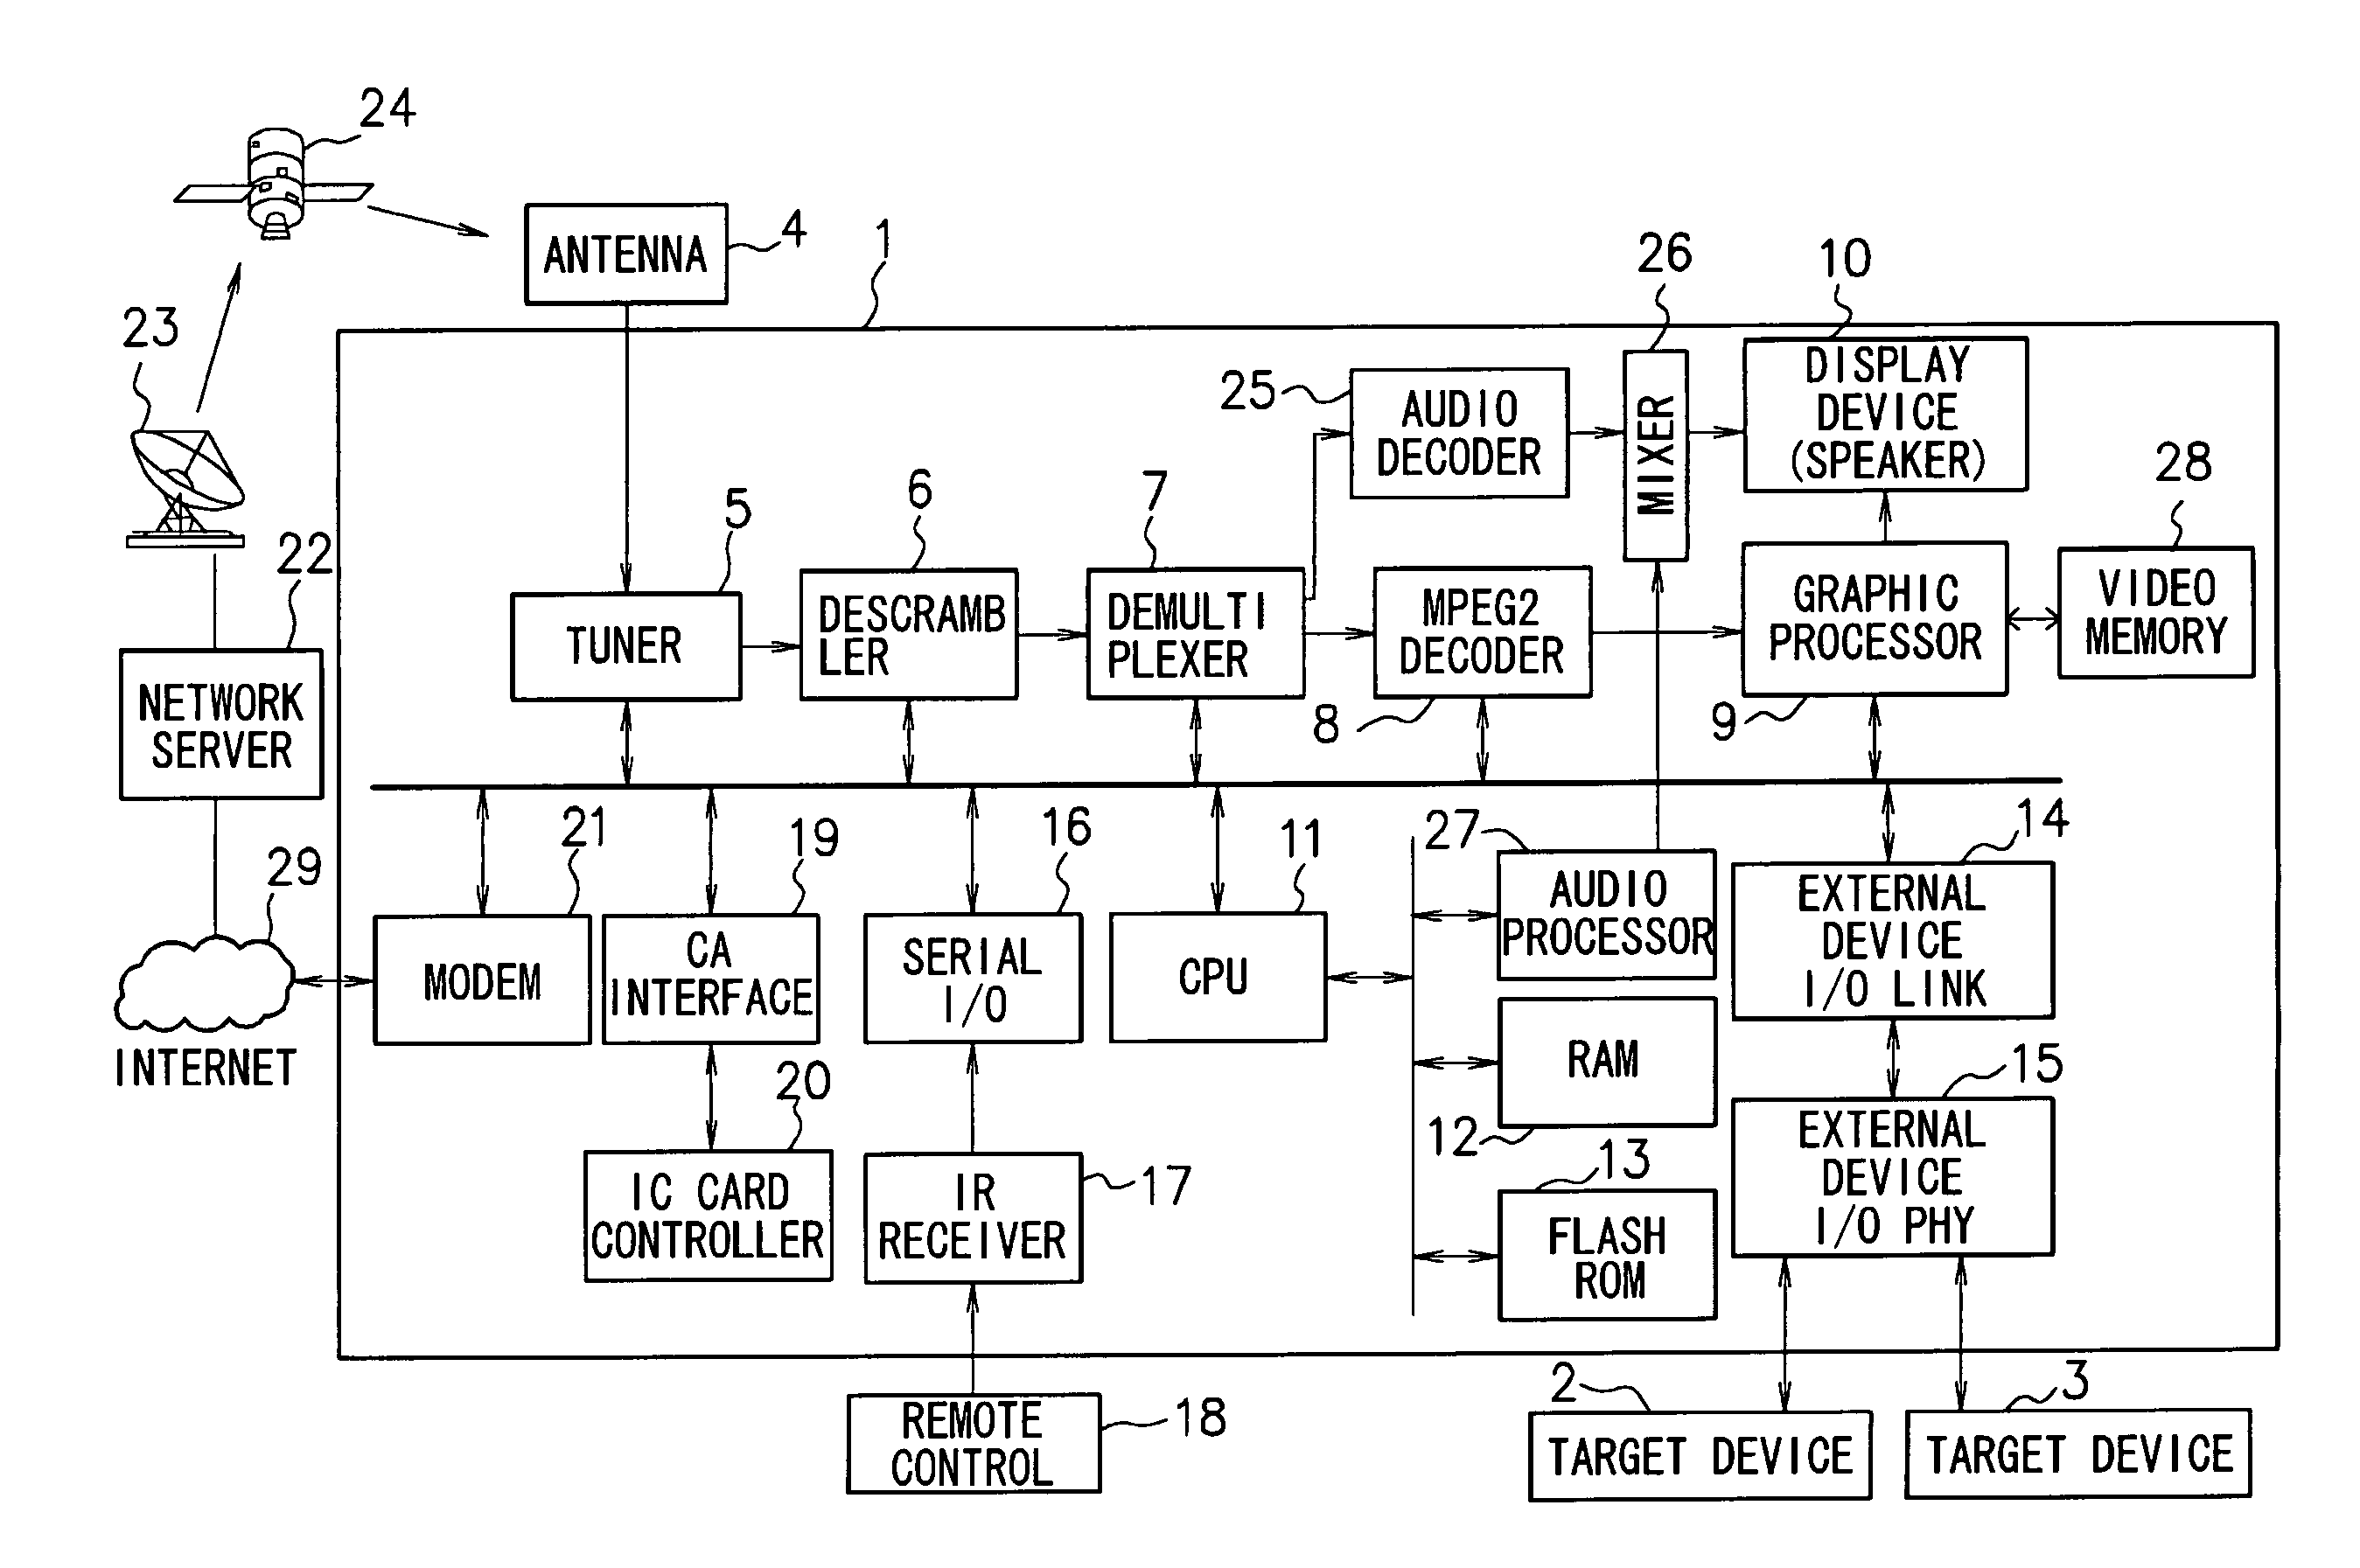 Broadcast receiving device and method of controlling a broadcast receiving device with controller for updating a panel element in a display